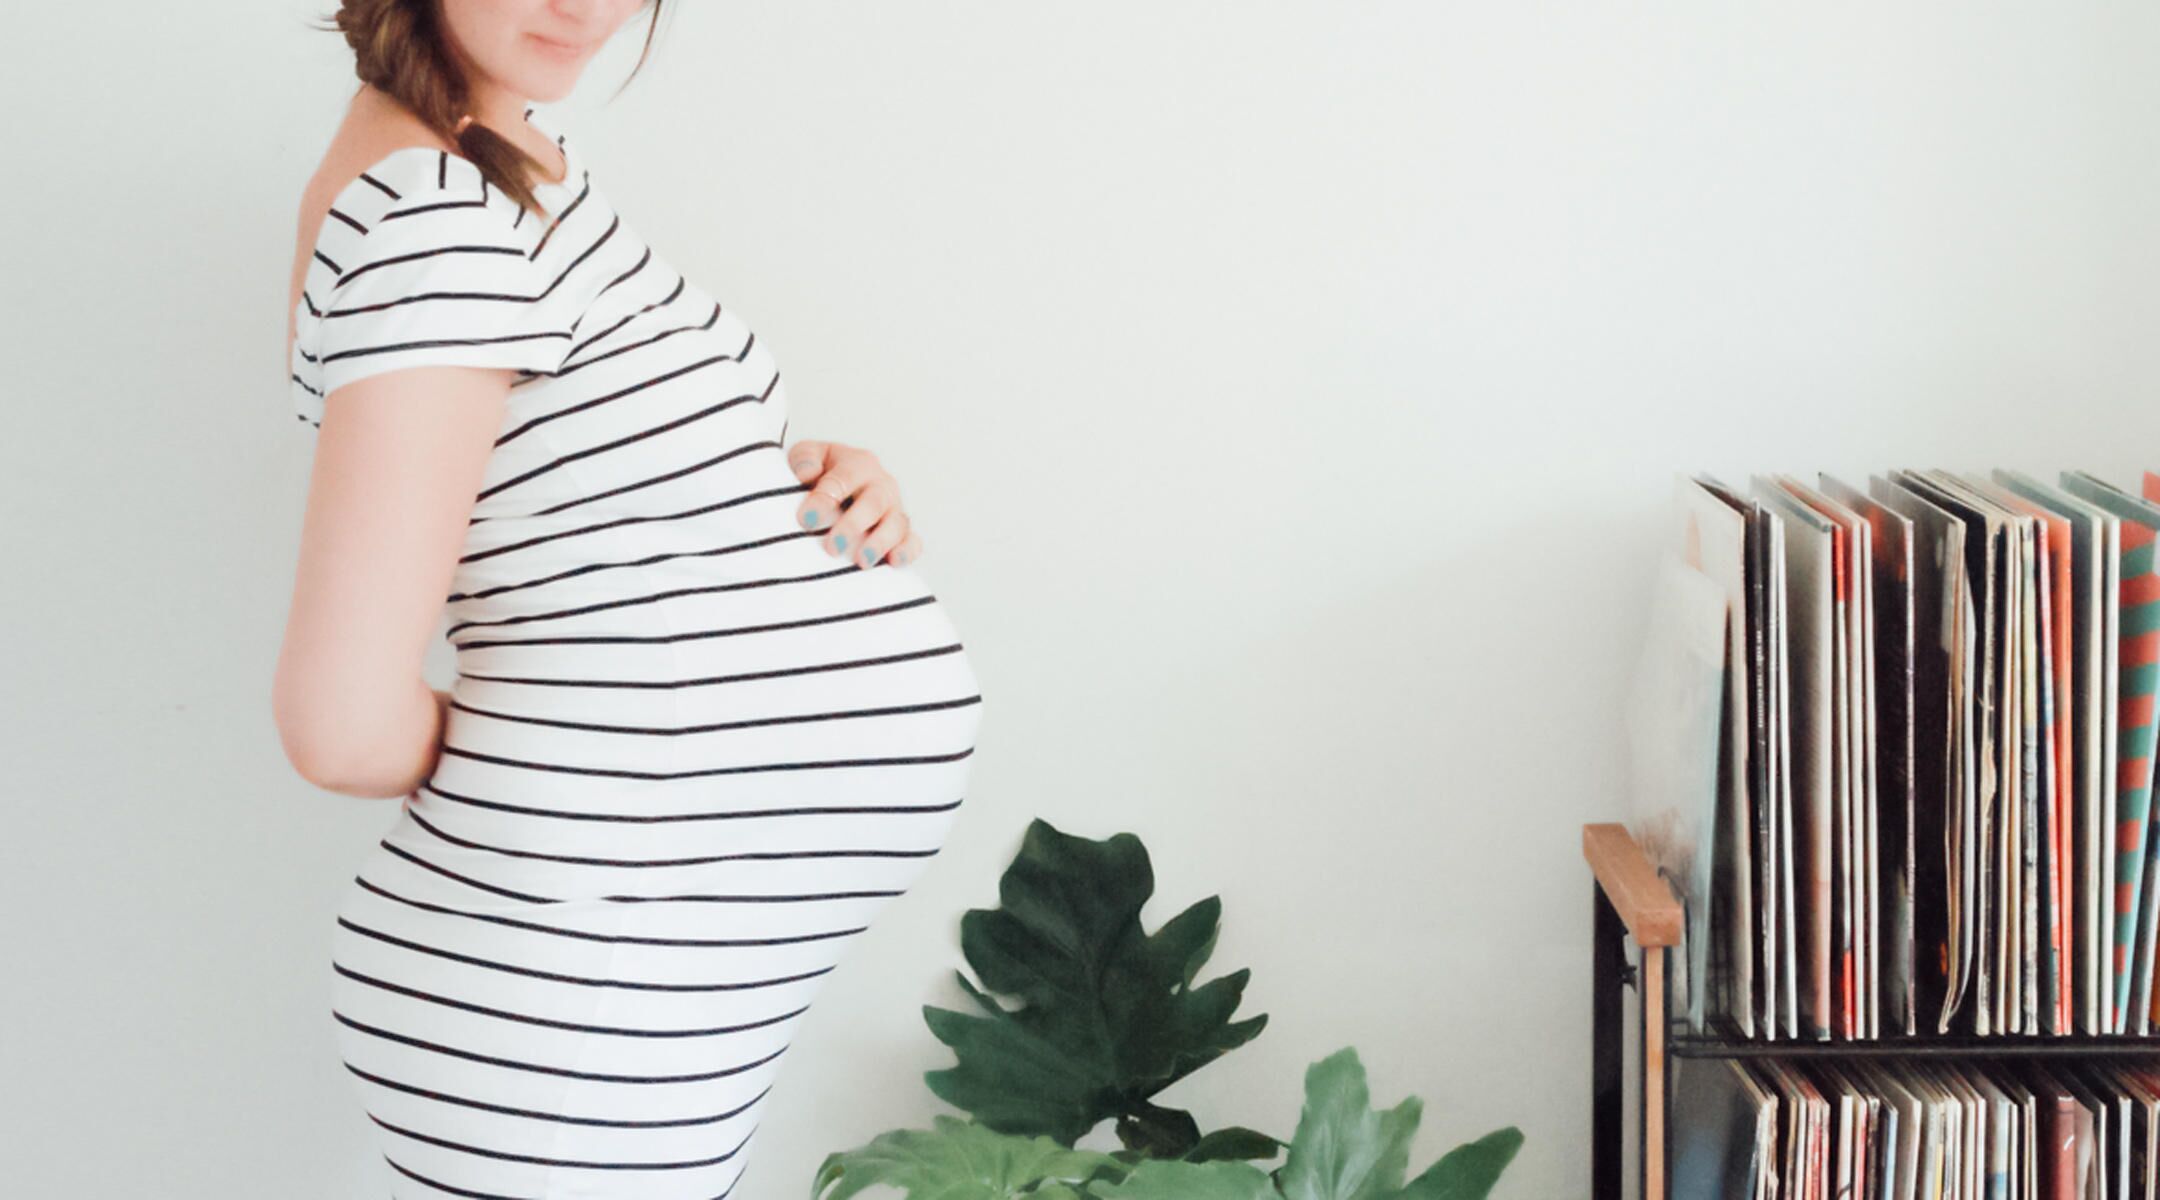 5 Reasons to Consider Getting a Doula